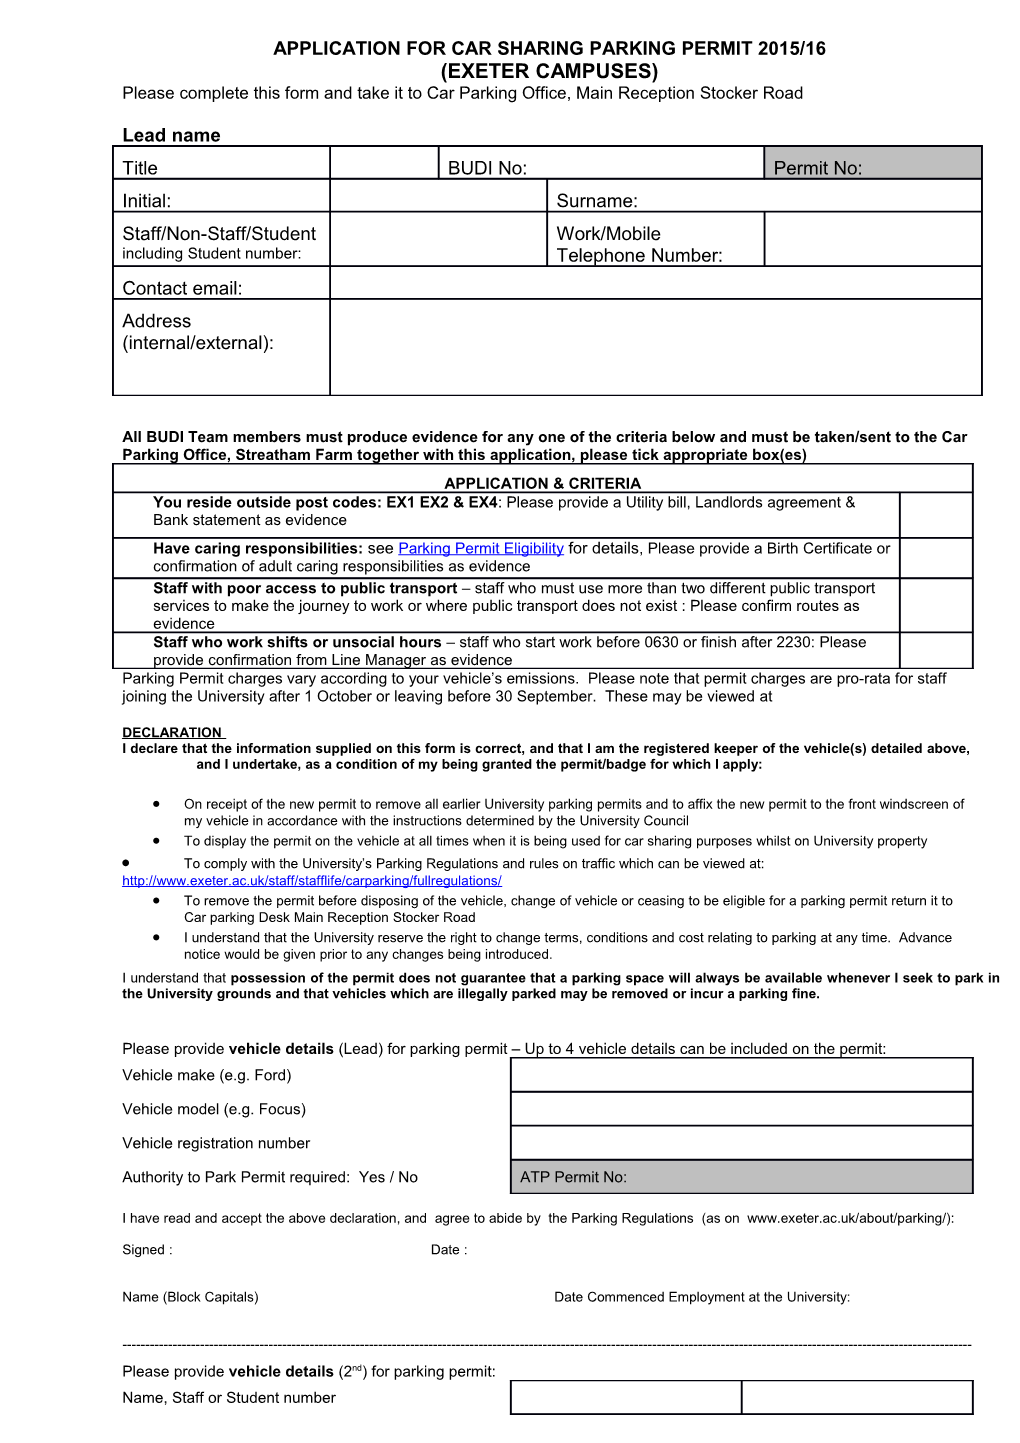 Application for Car Sharing Parking Permit 2015/16